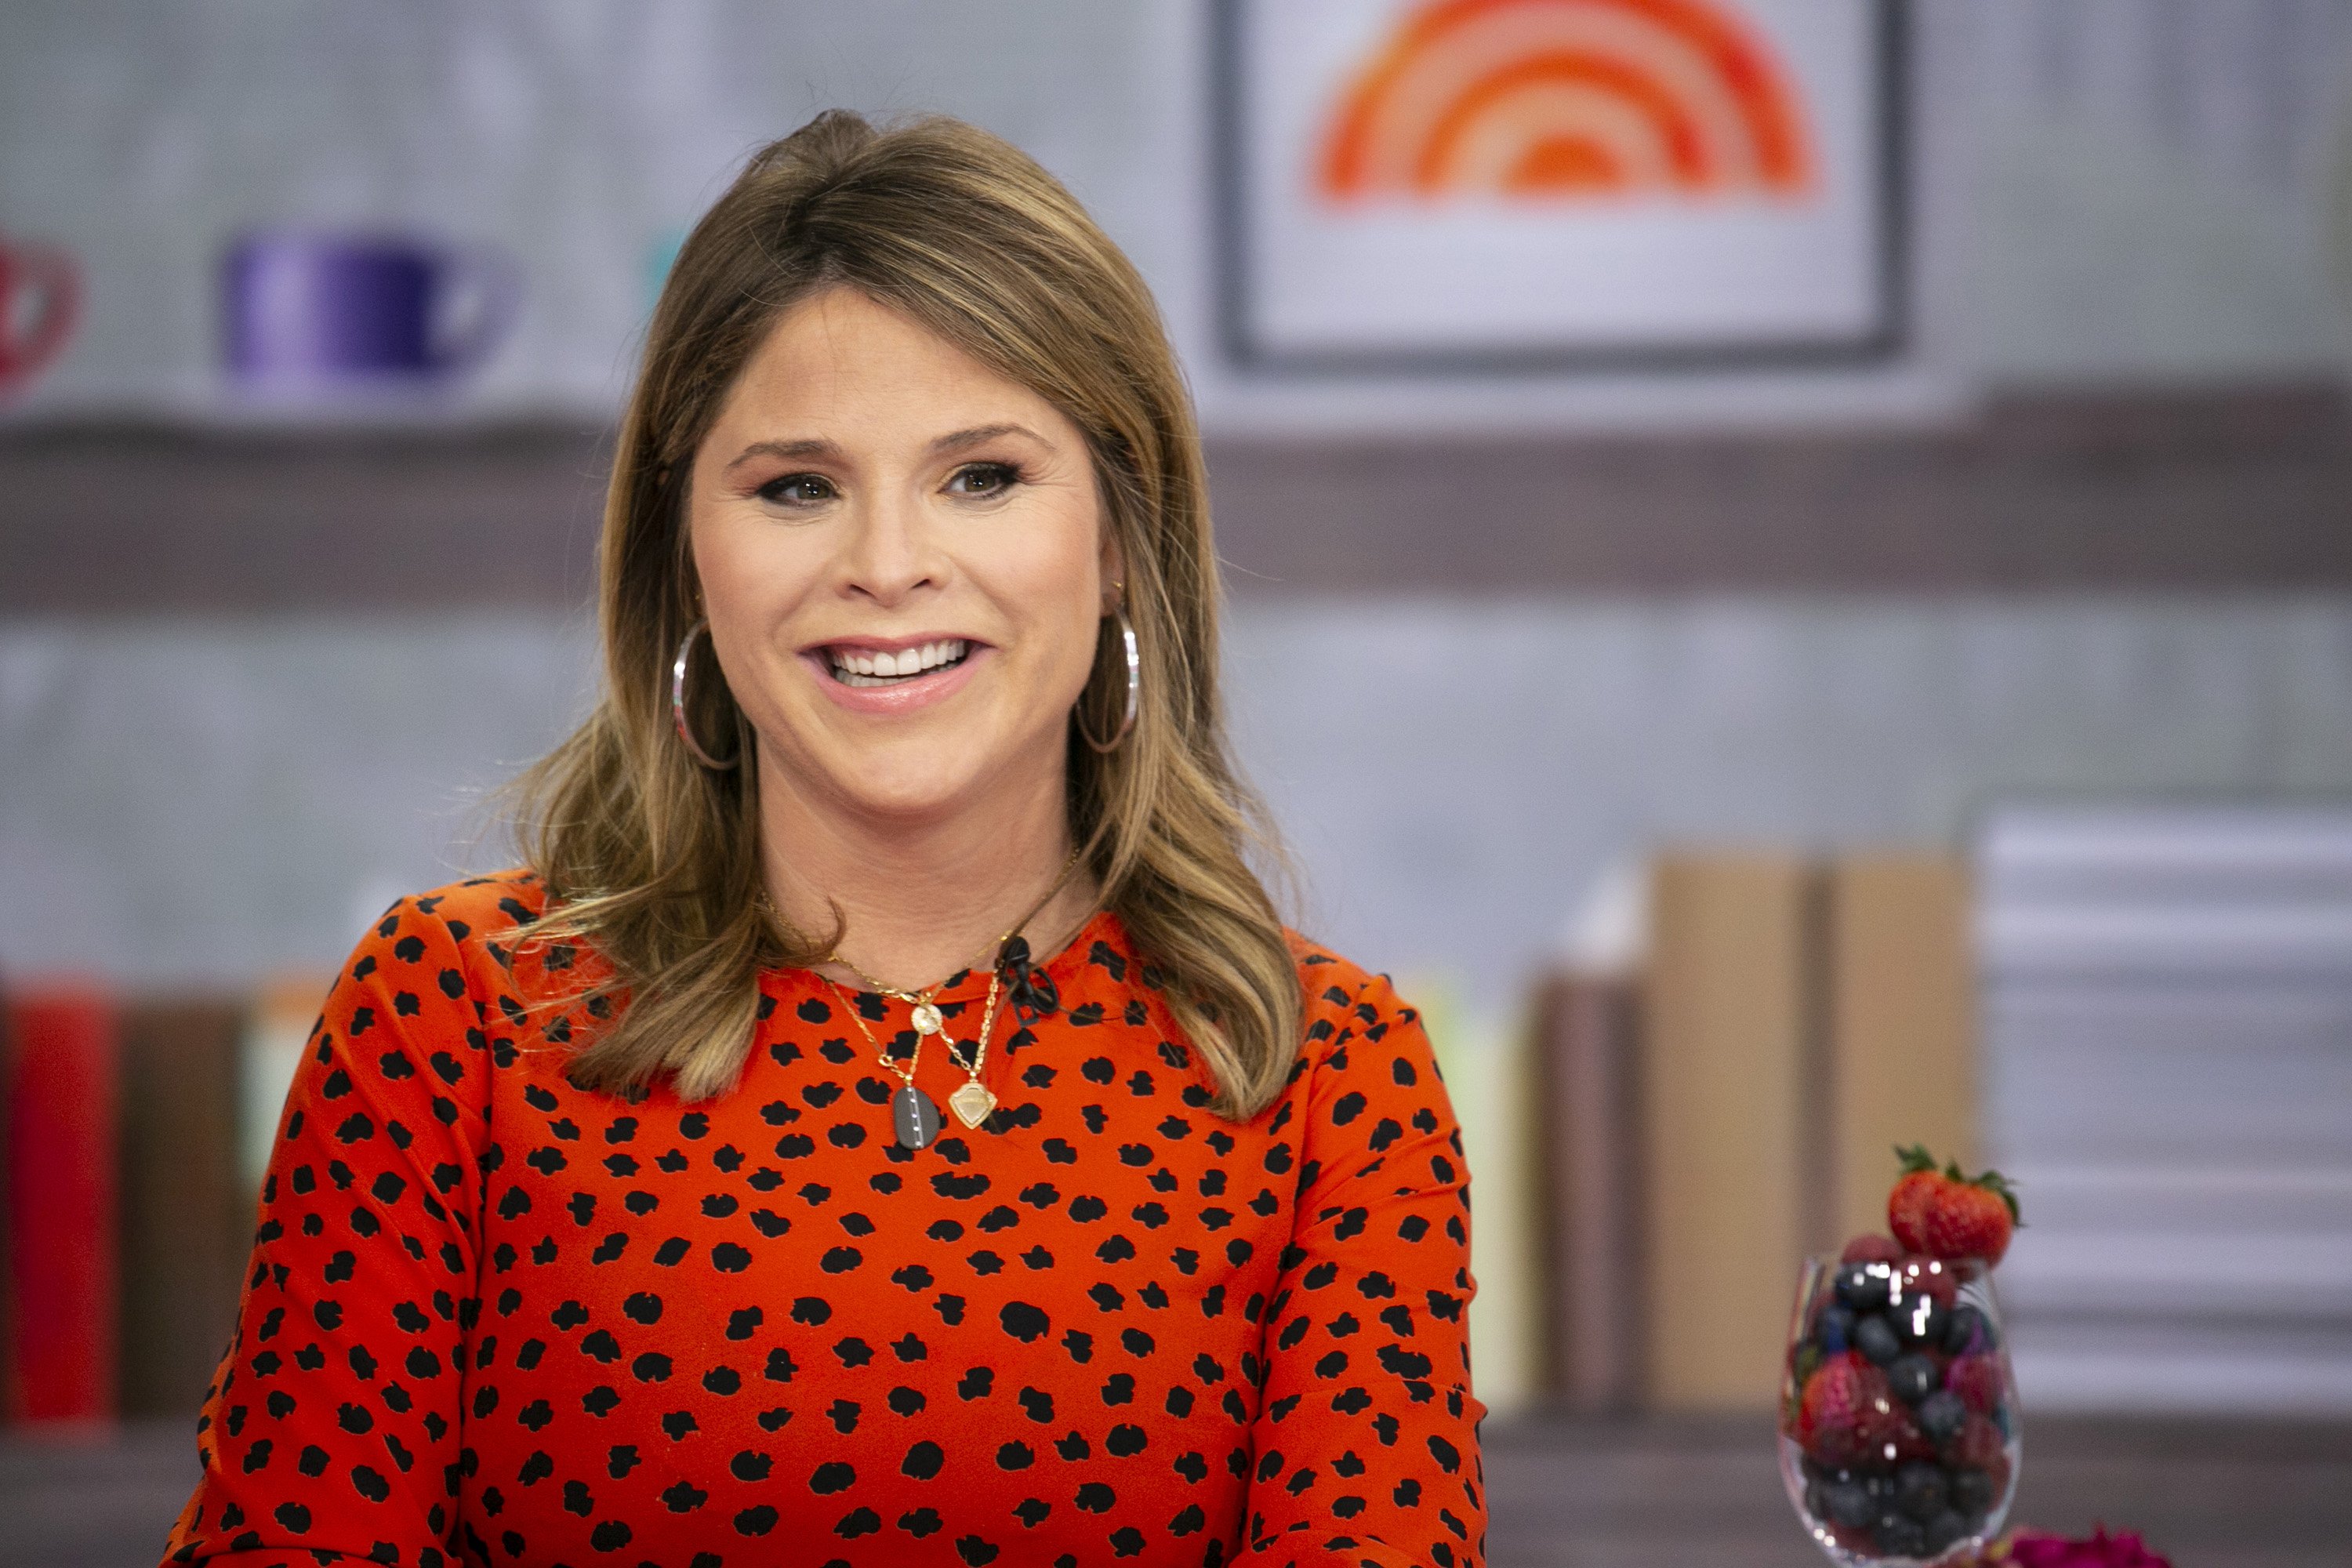 Jenna Bush Hager pictured during the filming of an episode of "Today," 2019. | Photo: Getty Images